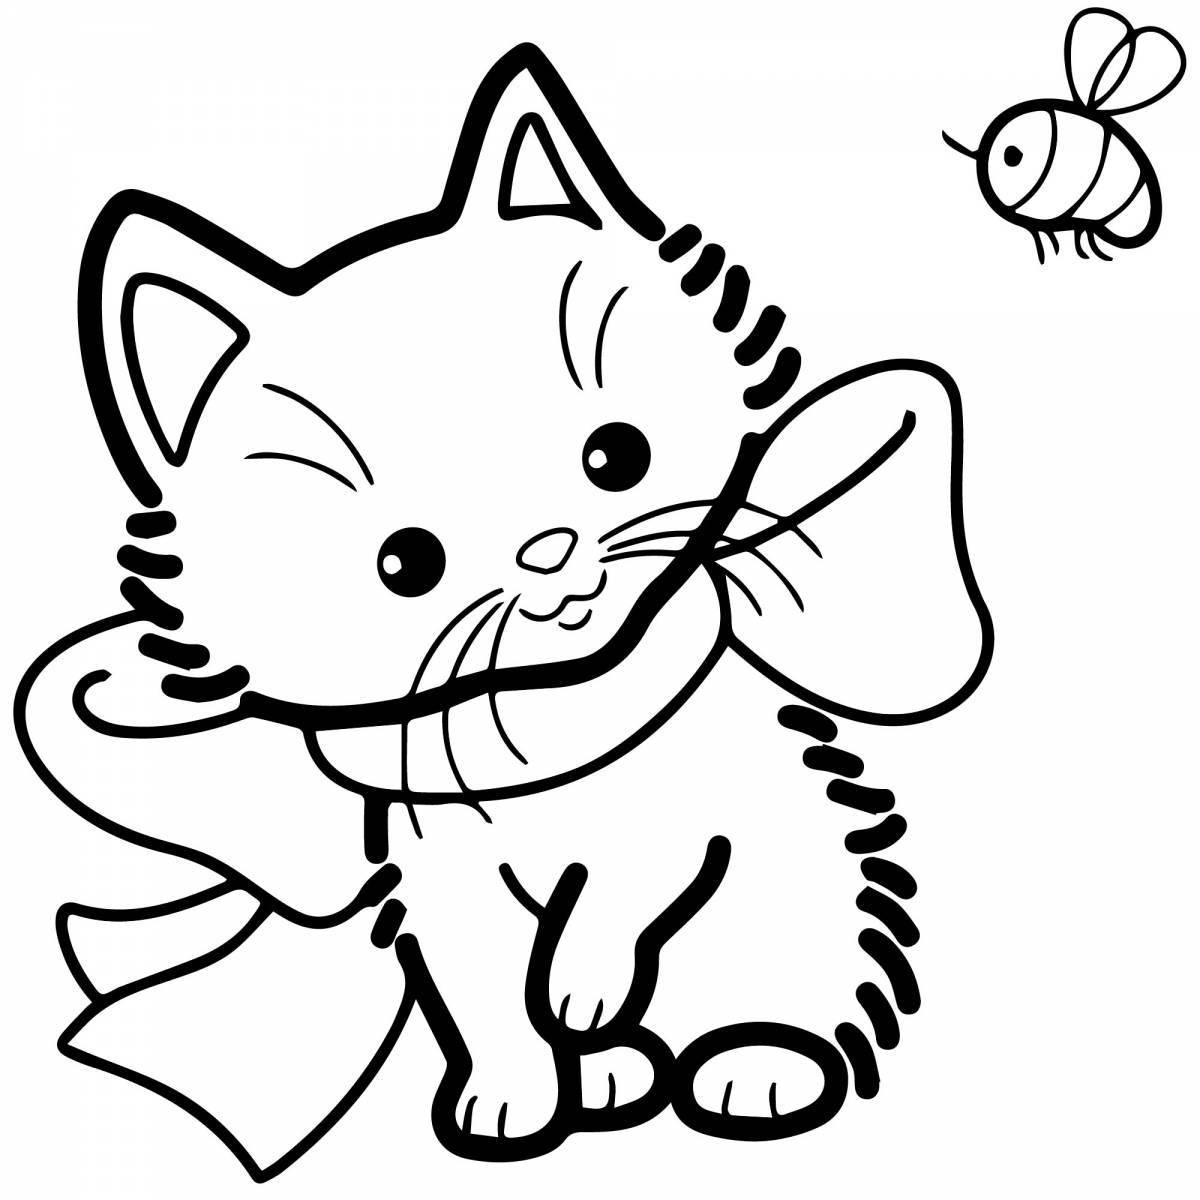 Coloring page affectionate kitten